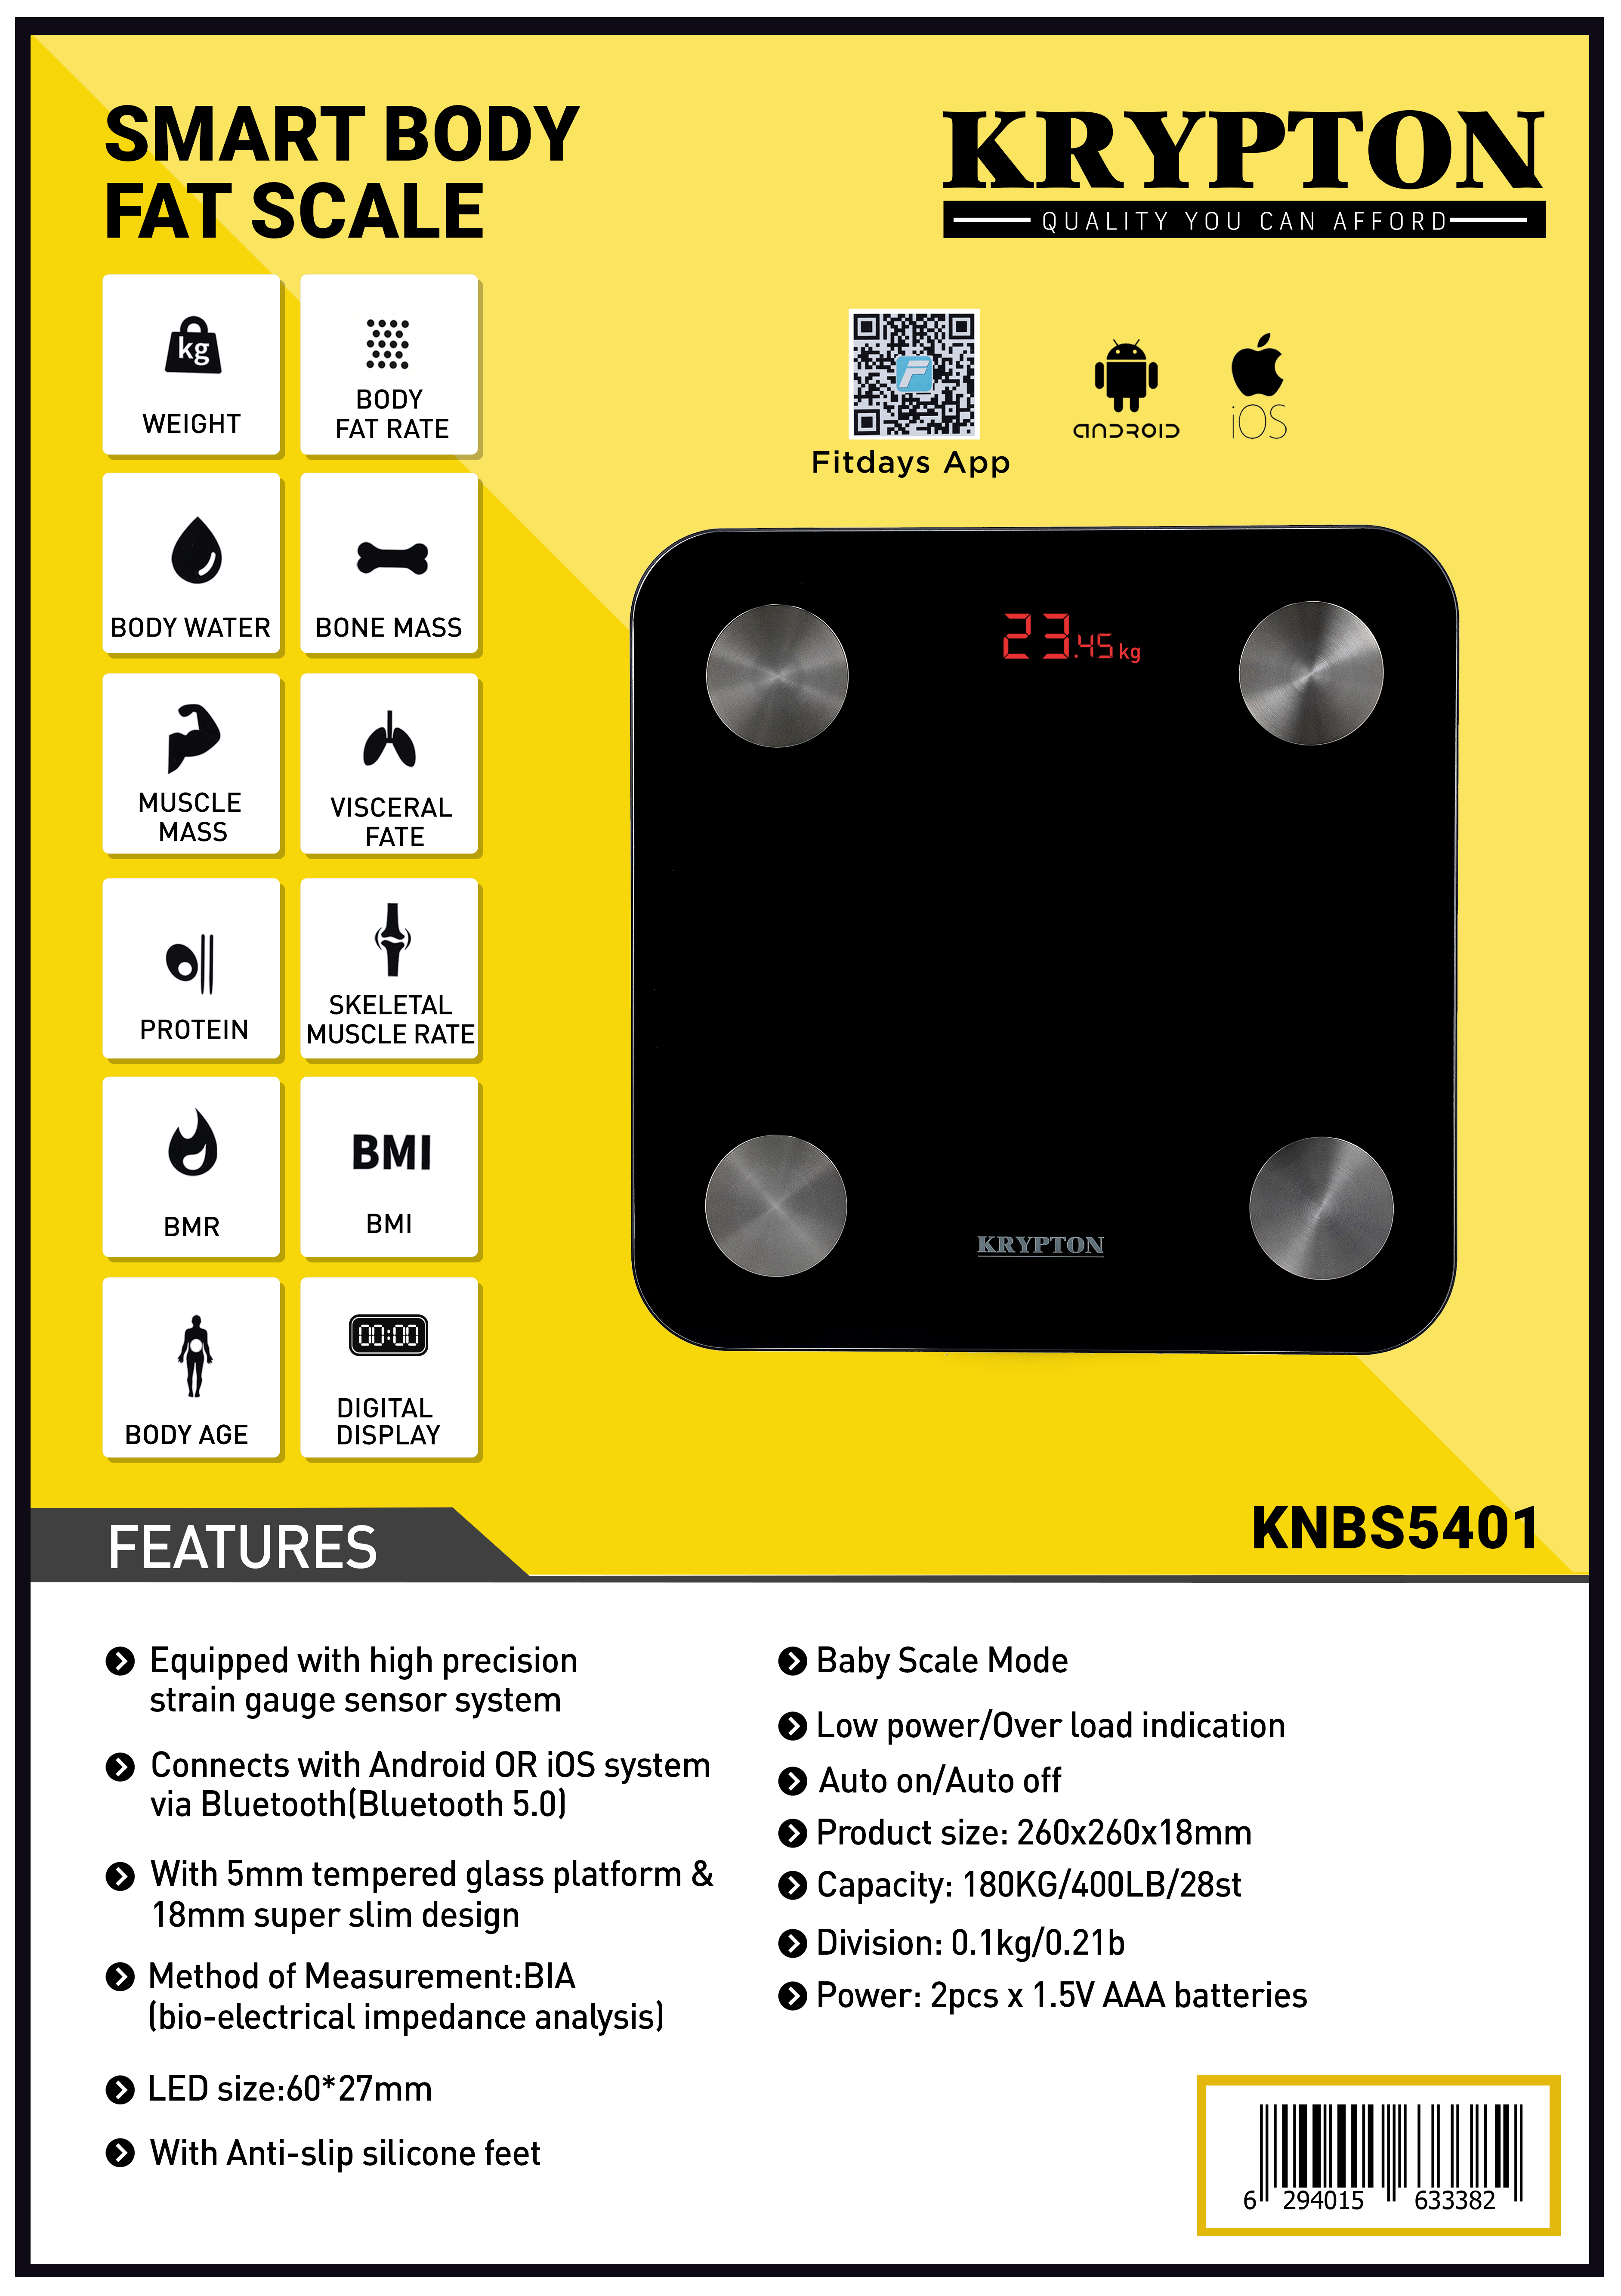 Active Era Digital Body Weight Scale - Ultra Slim High Precision Bathroom  Scale with Tempered Glass, Step-on Technology and Backlit Display - Body  Weighing Scale 180kg / 400lb (lbs/Stone/kgs)